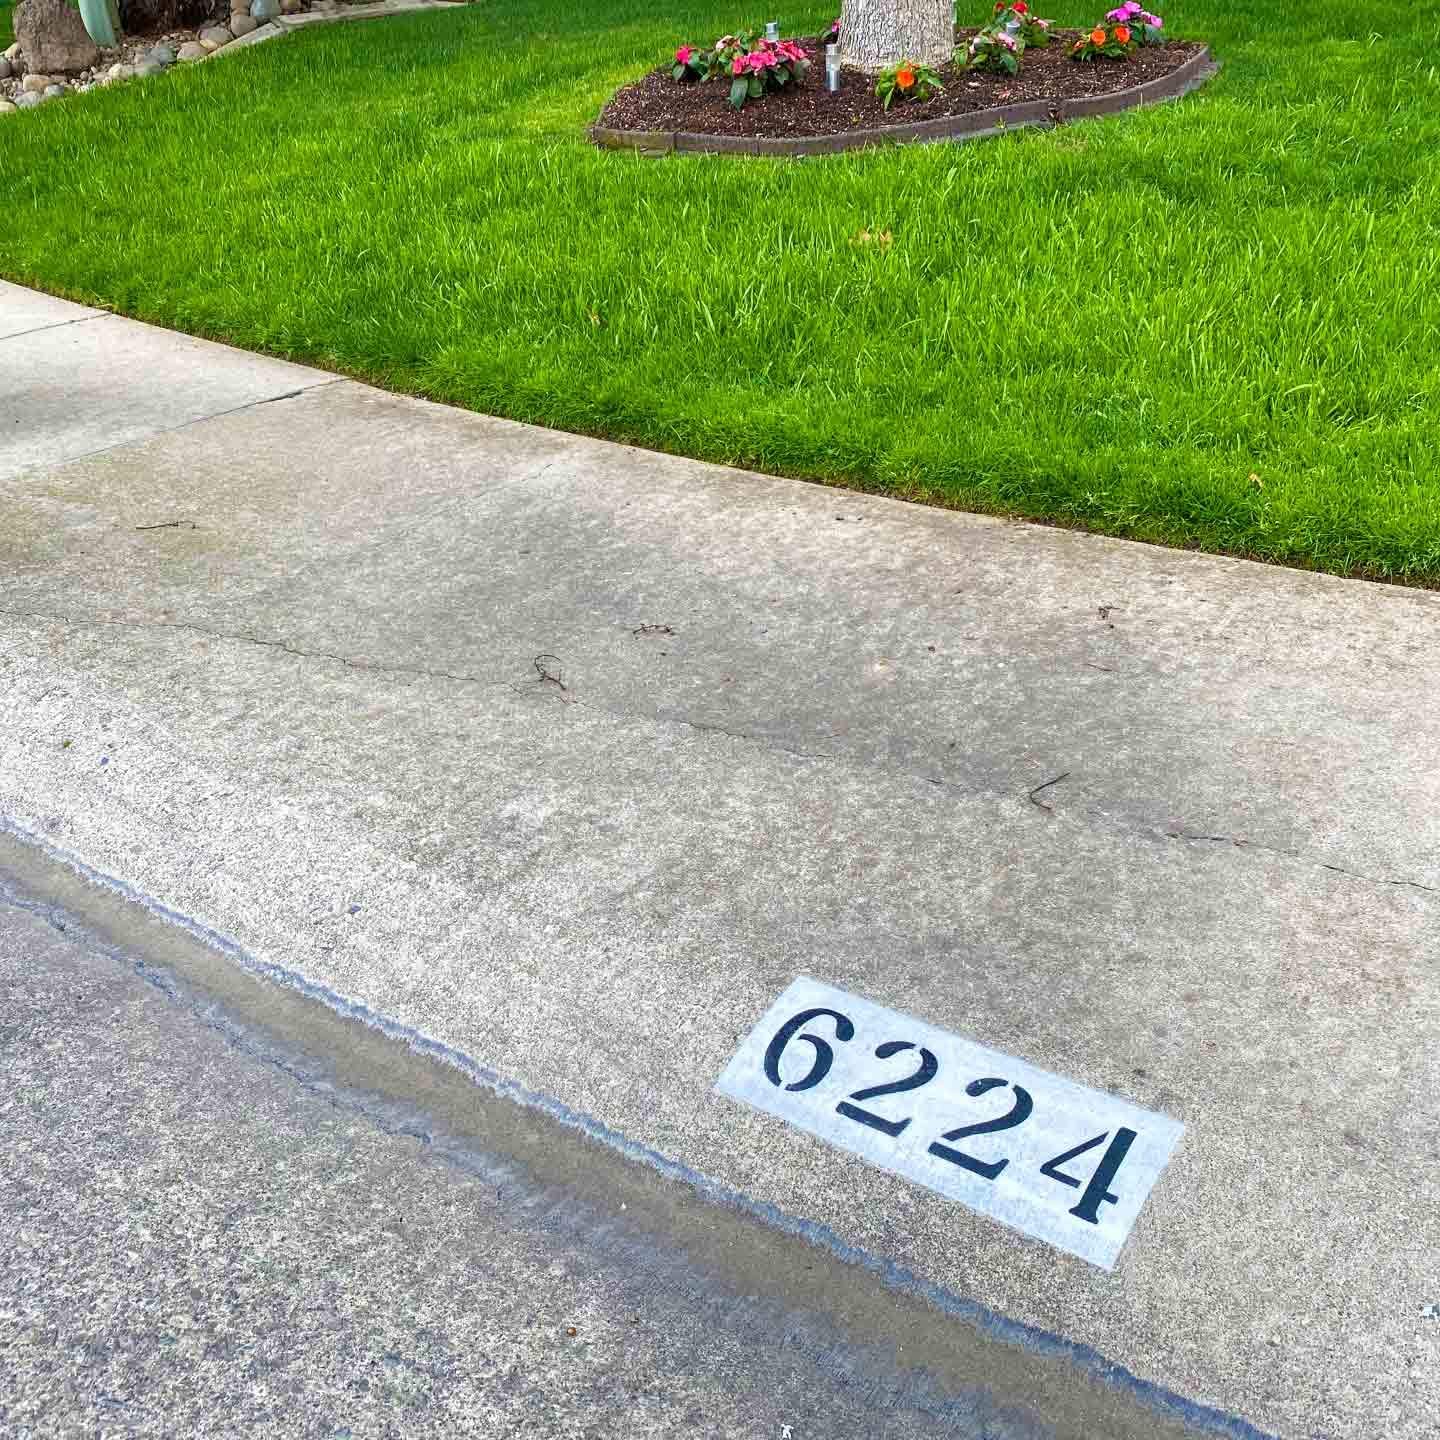 Number Stencils 4 inch Curb, 20PCS 0-9 Address Curb Stencil Kit Reusable  Plastic Numbers Interlocking Stencils with 2 Rolls Masking Tape for  Painting